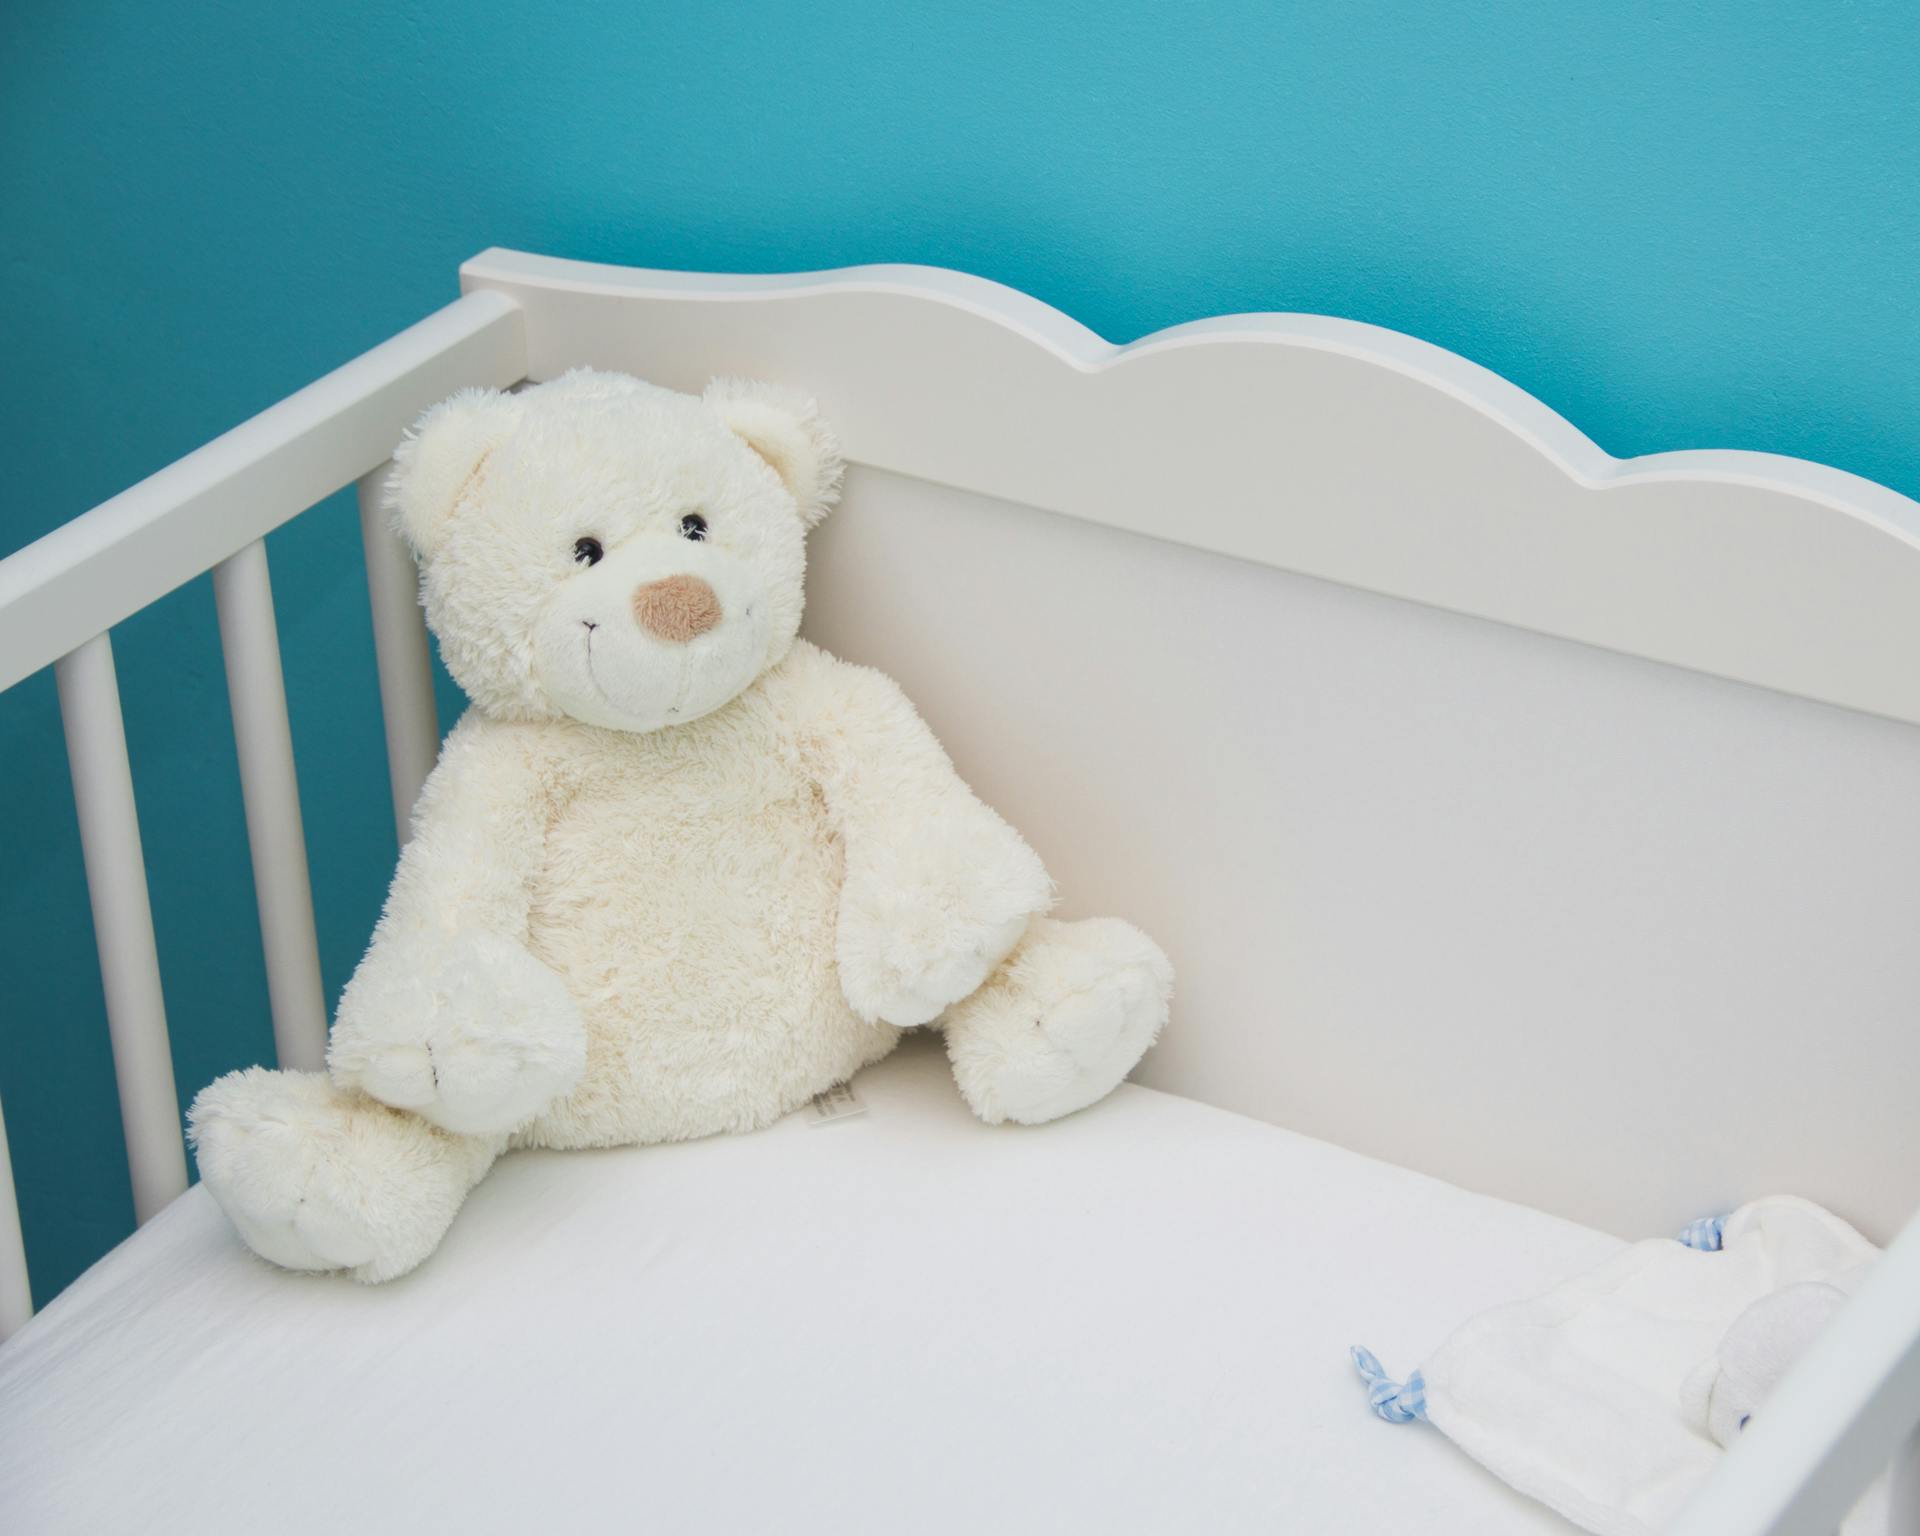 A white bear plush toy in a baby cot | Source: Pexels